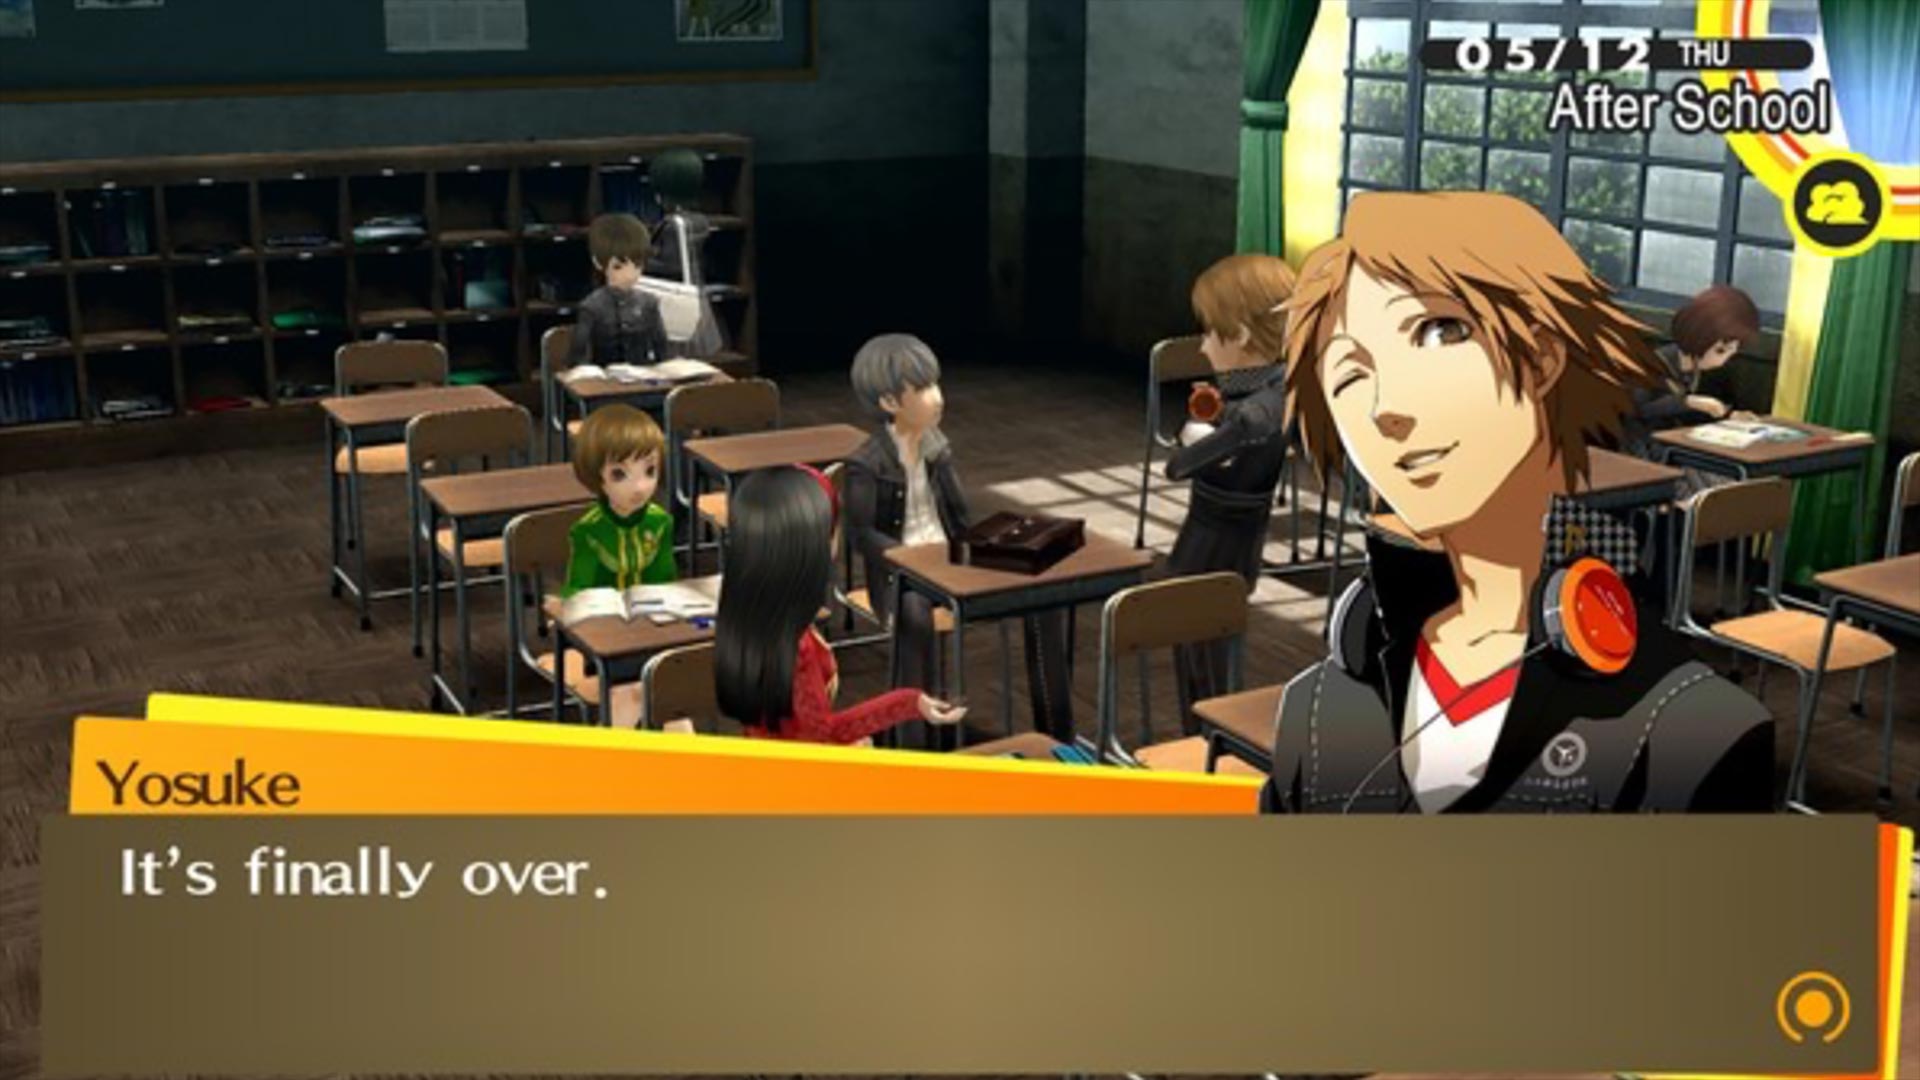 Yosuke says "it's finally over" in Persona 4 Golden.